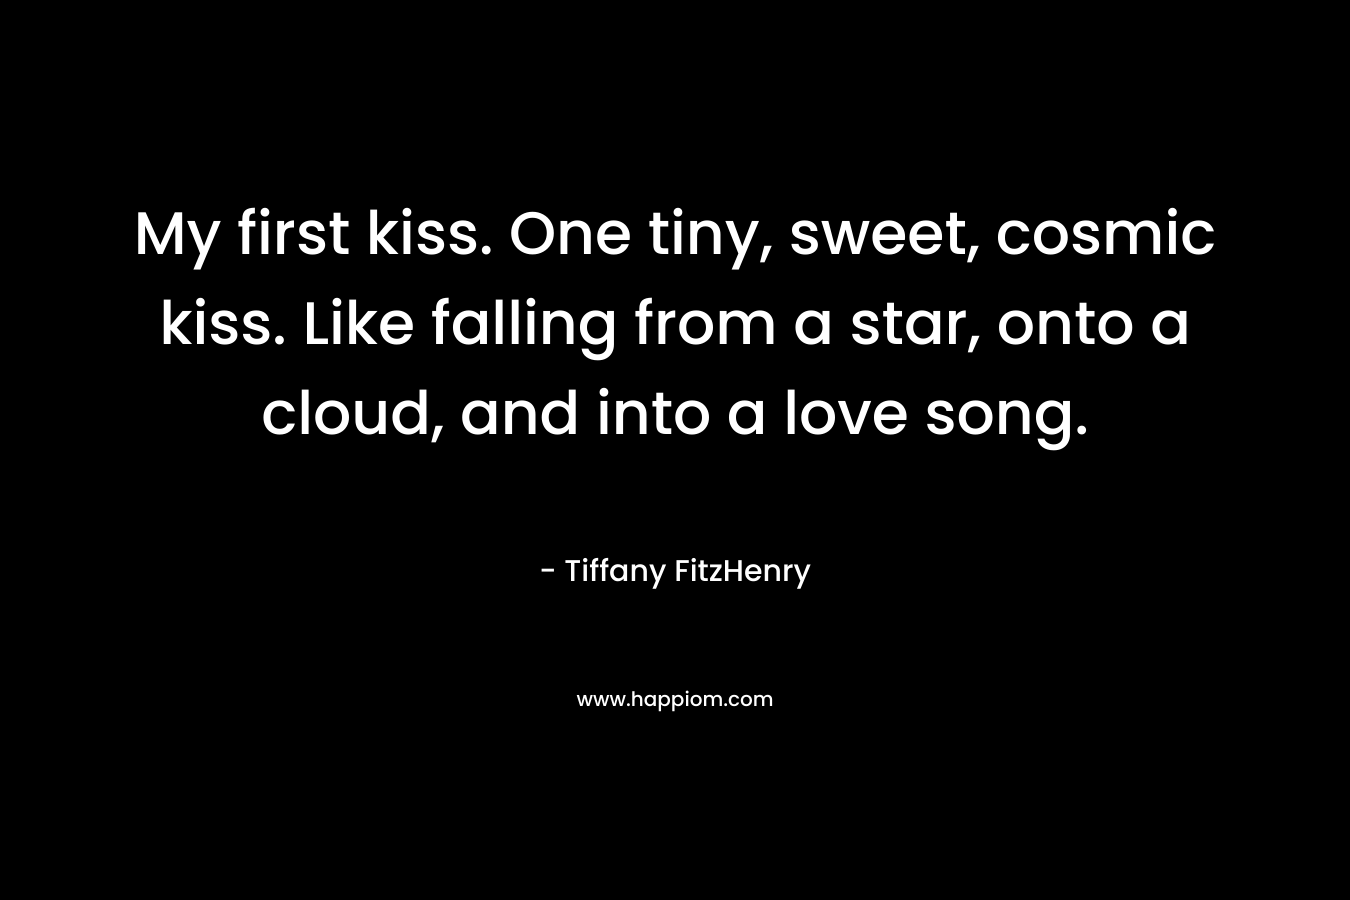 My first kiss. One tiny, sweet, cosmic kiss. Like falling from a star, onto a cloud, and into a love song.